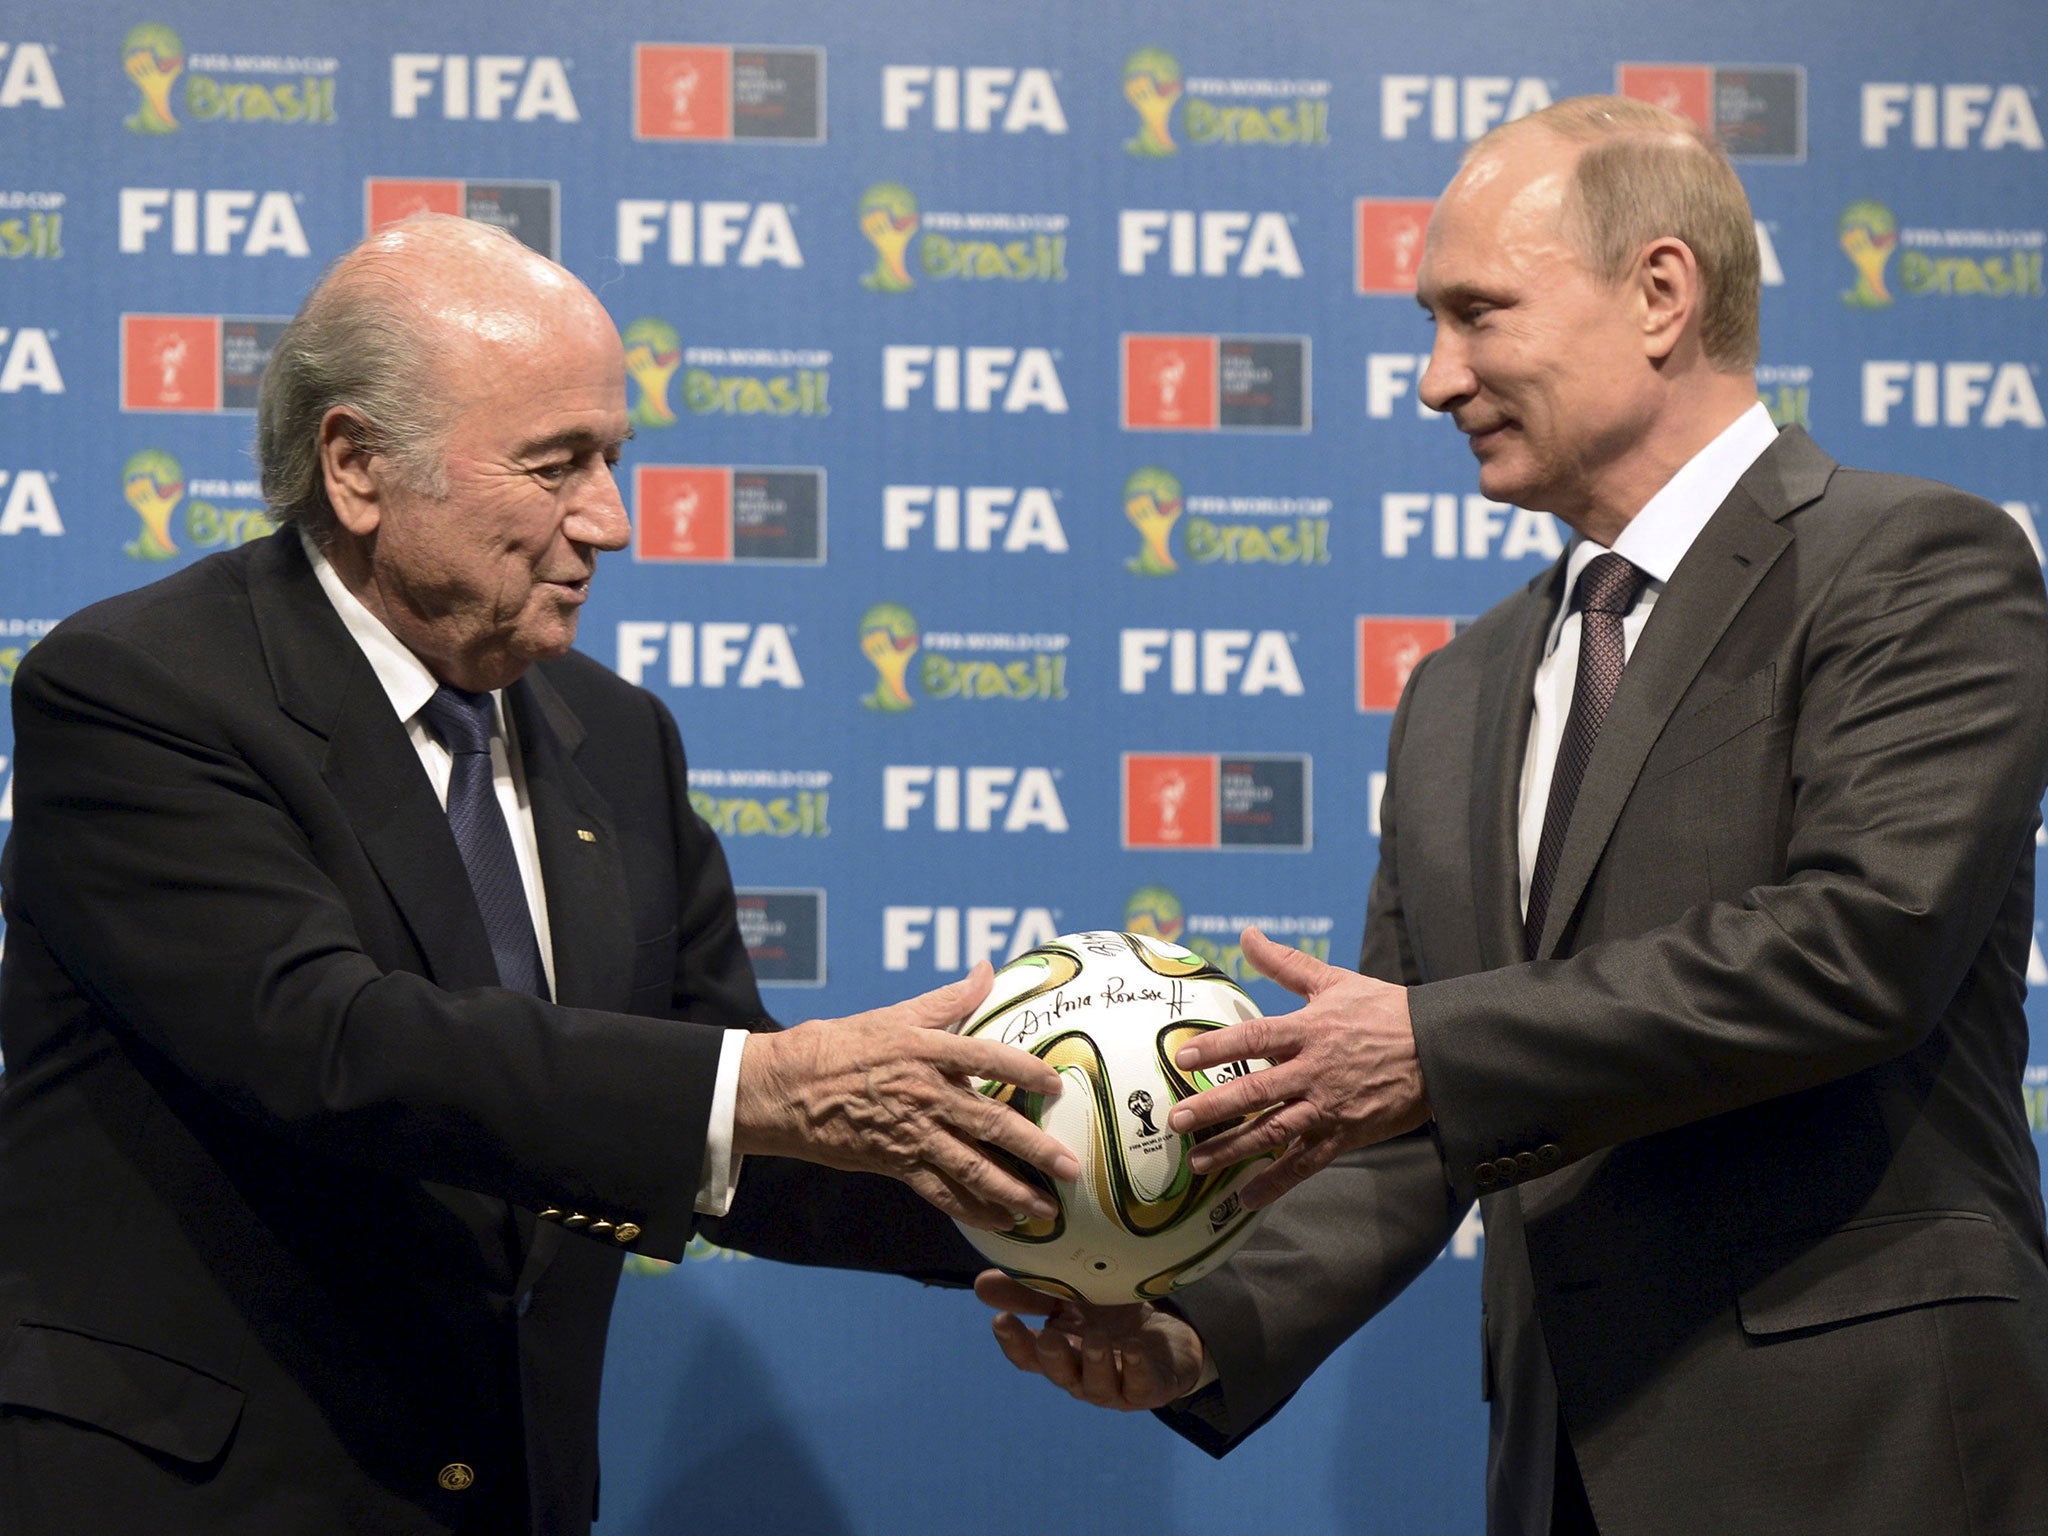 Sepp Blatter and Vladimir Putin. Was Russia awarded the 2018 World Cup unfairly?